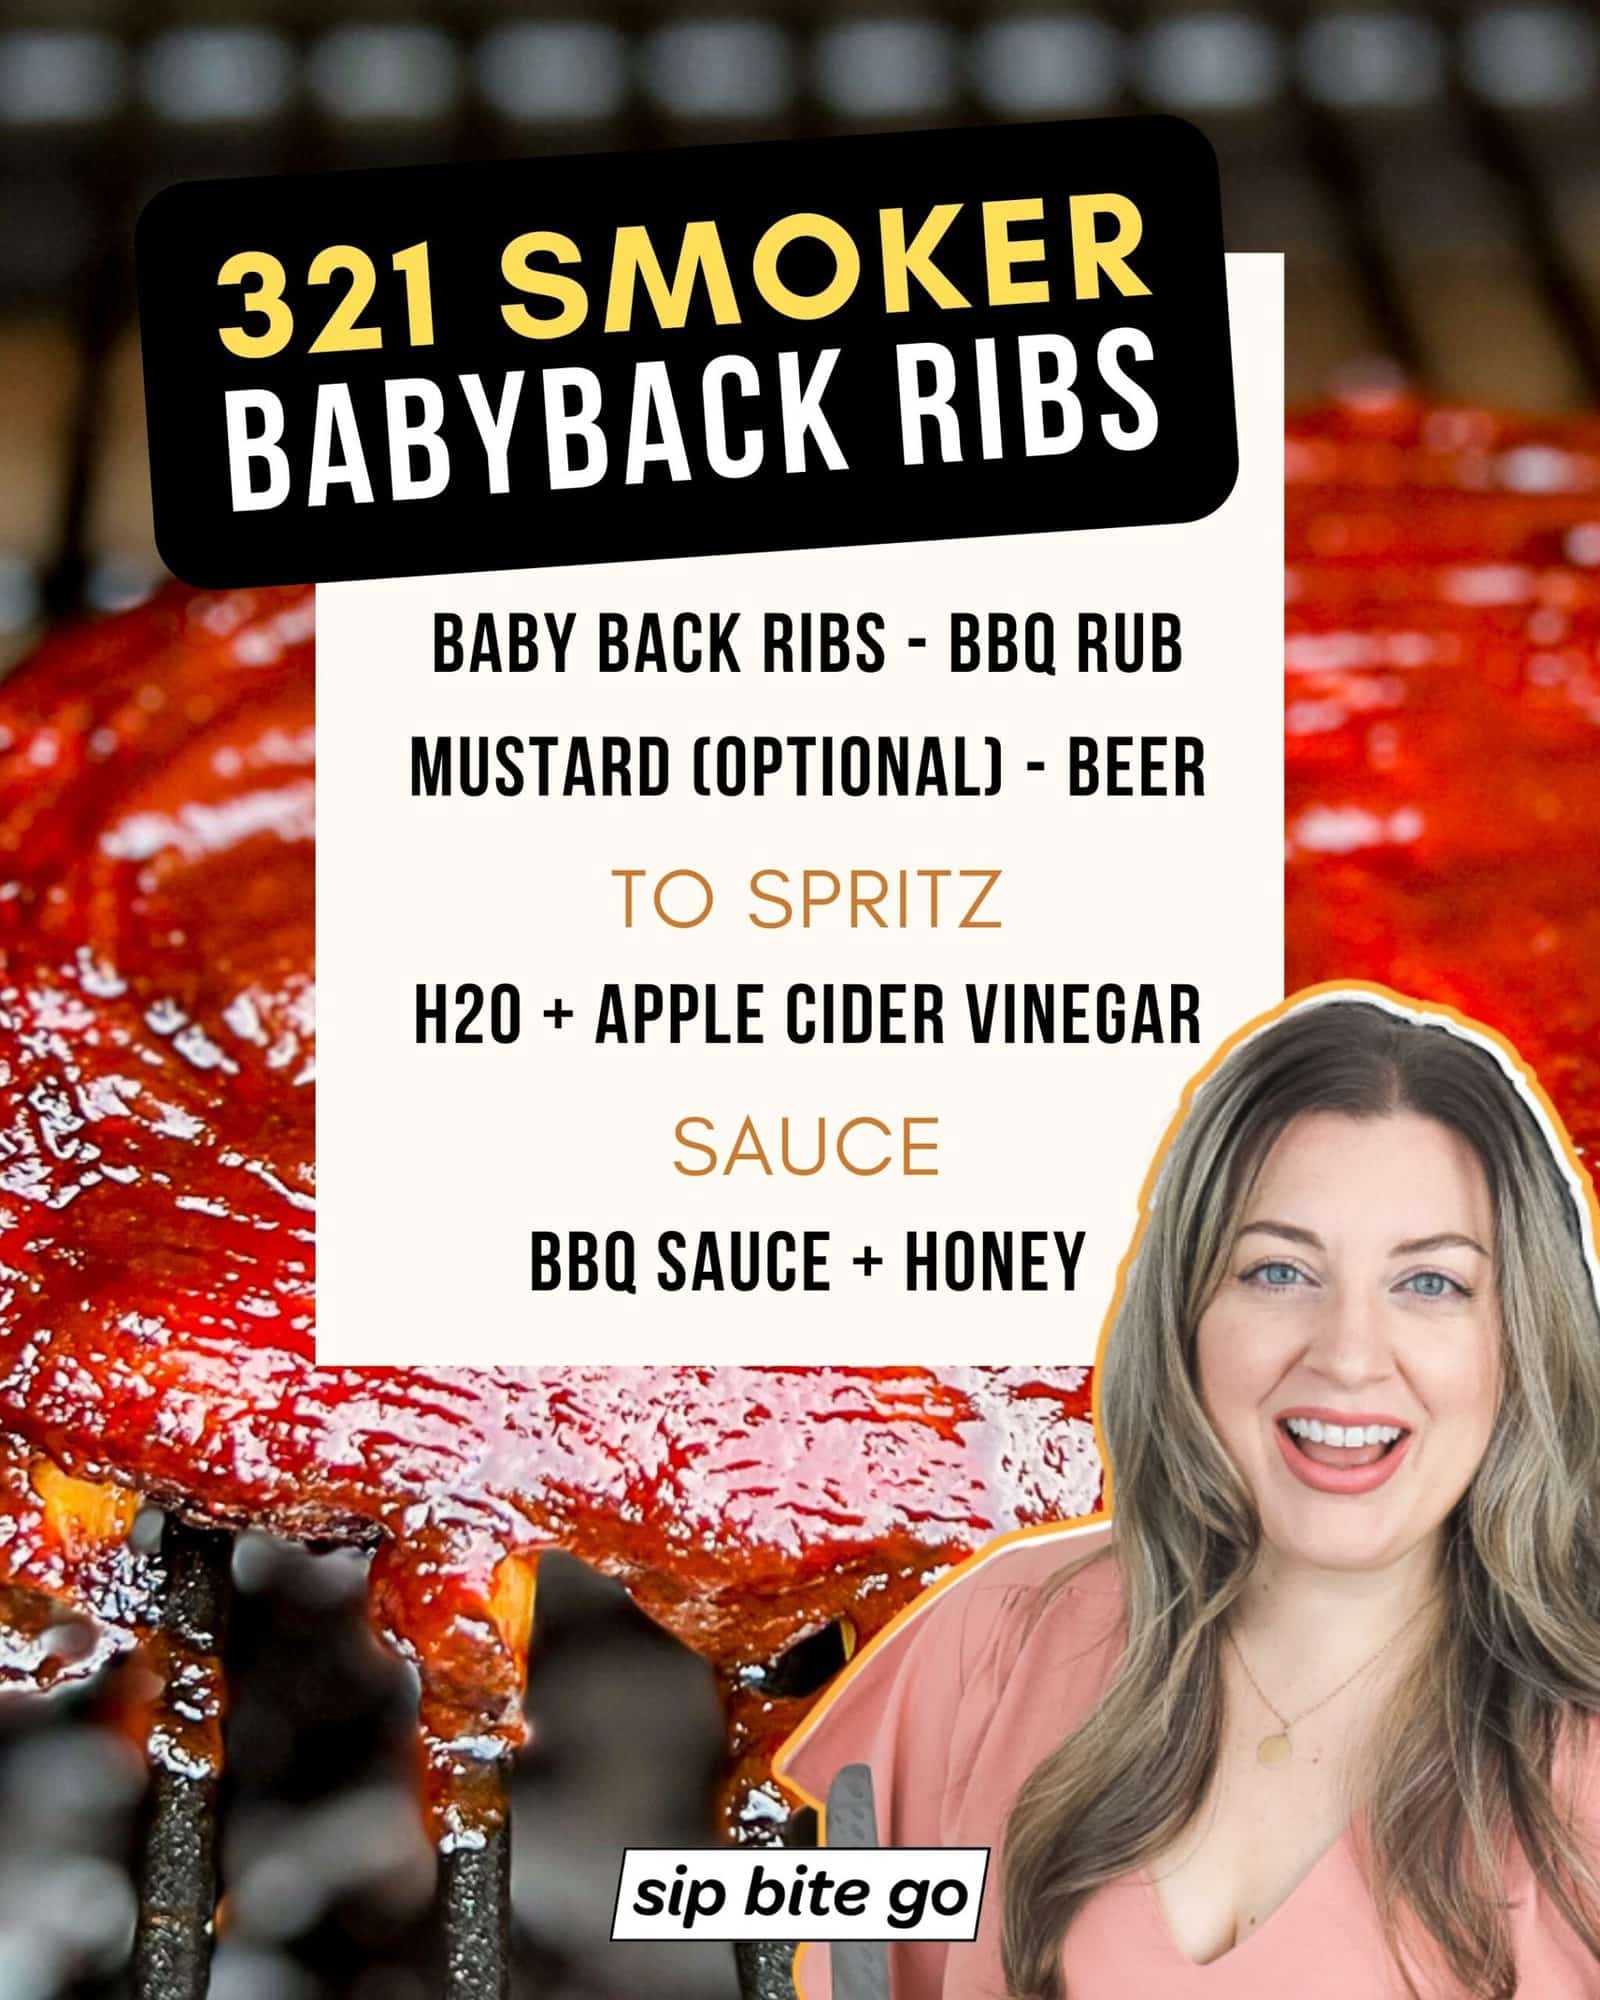 Infographic with list of ingredients to smoke baby back ribs with the 321 method